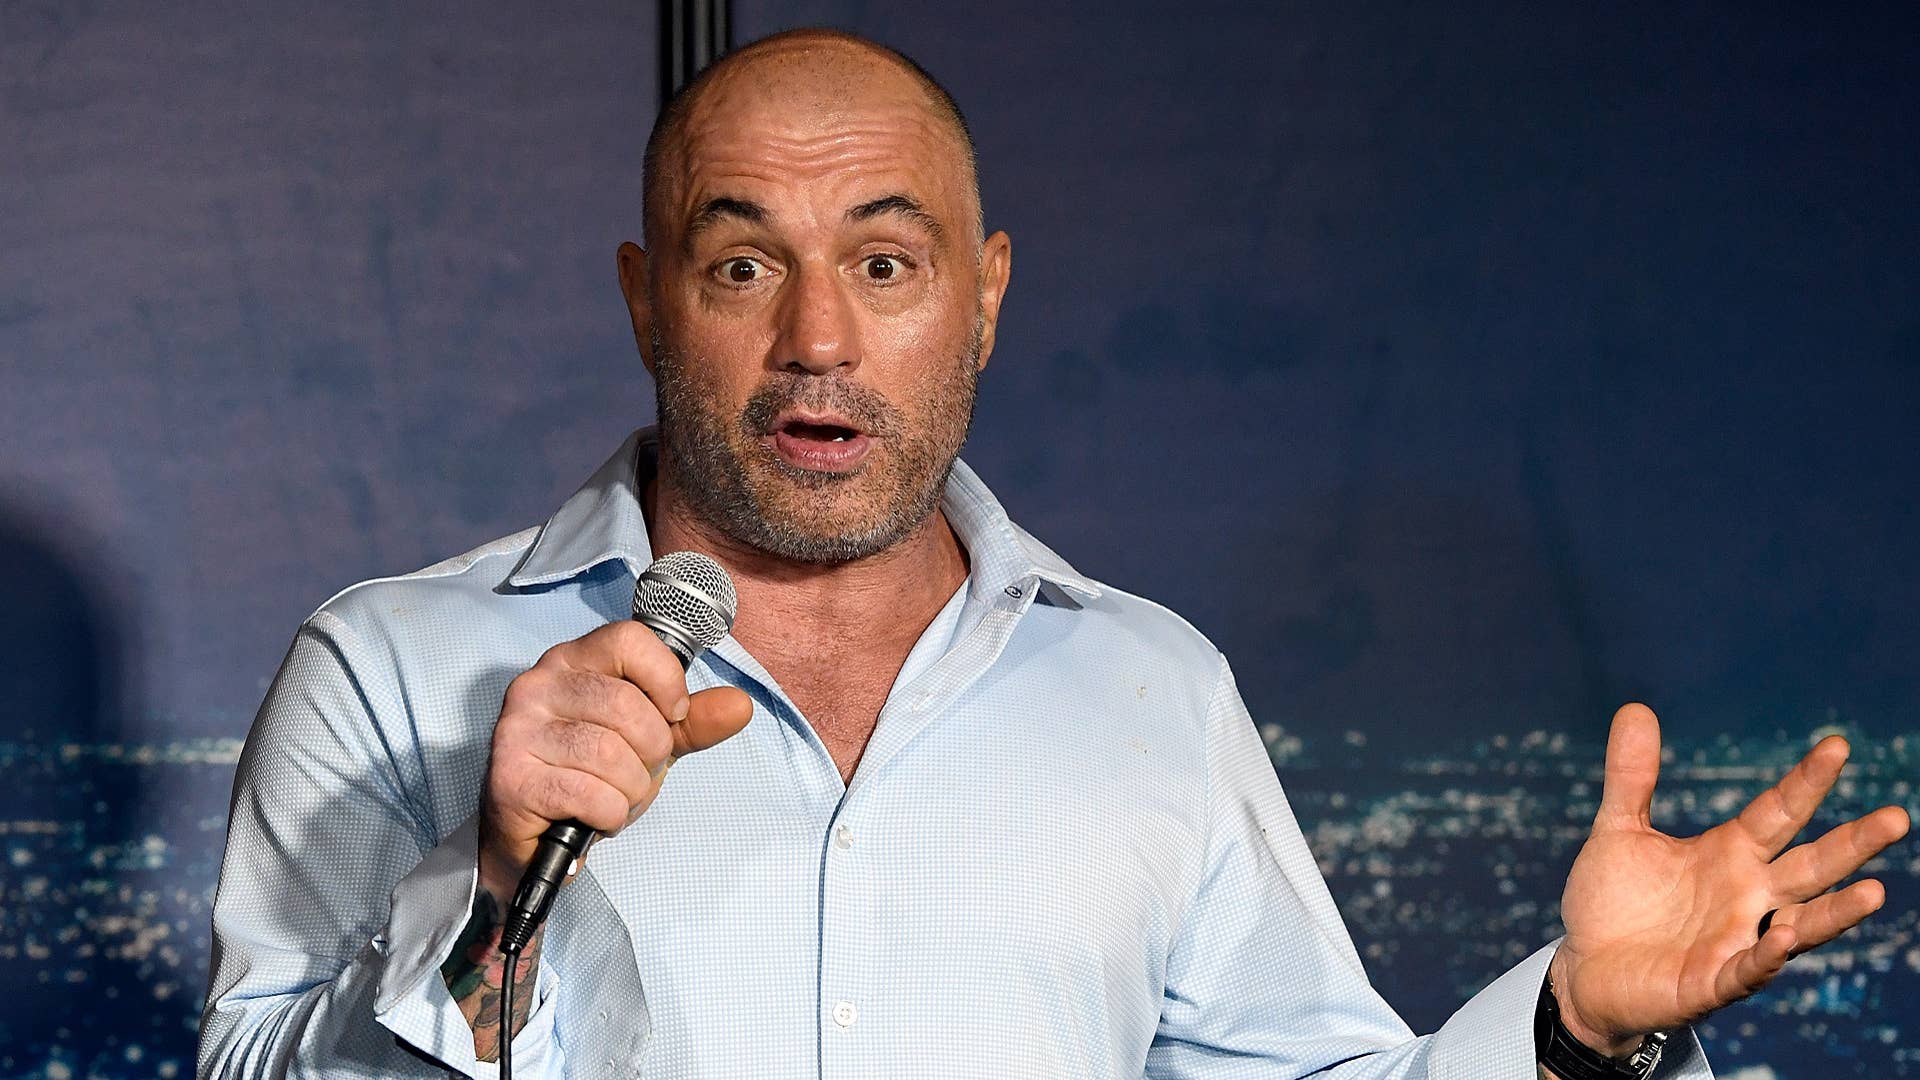 Joe Rogan performs stand-up at a comedy club.